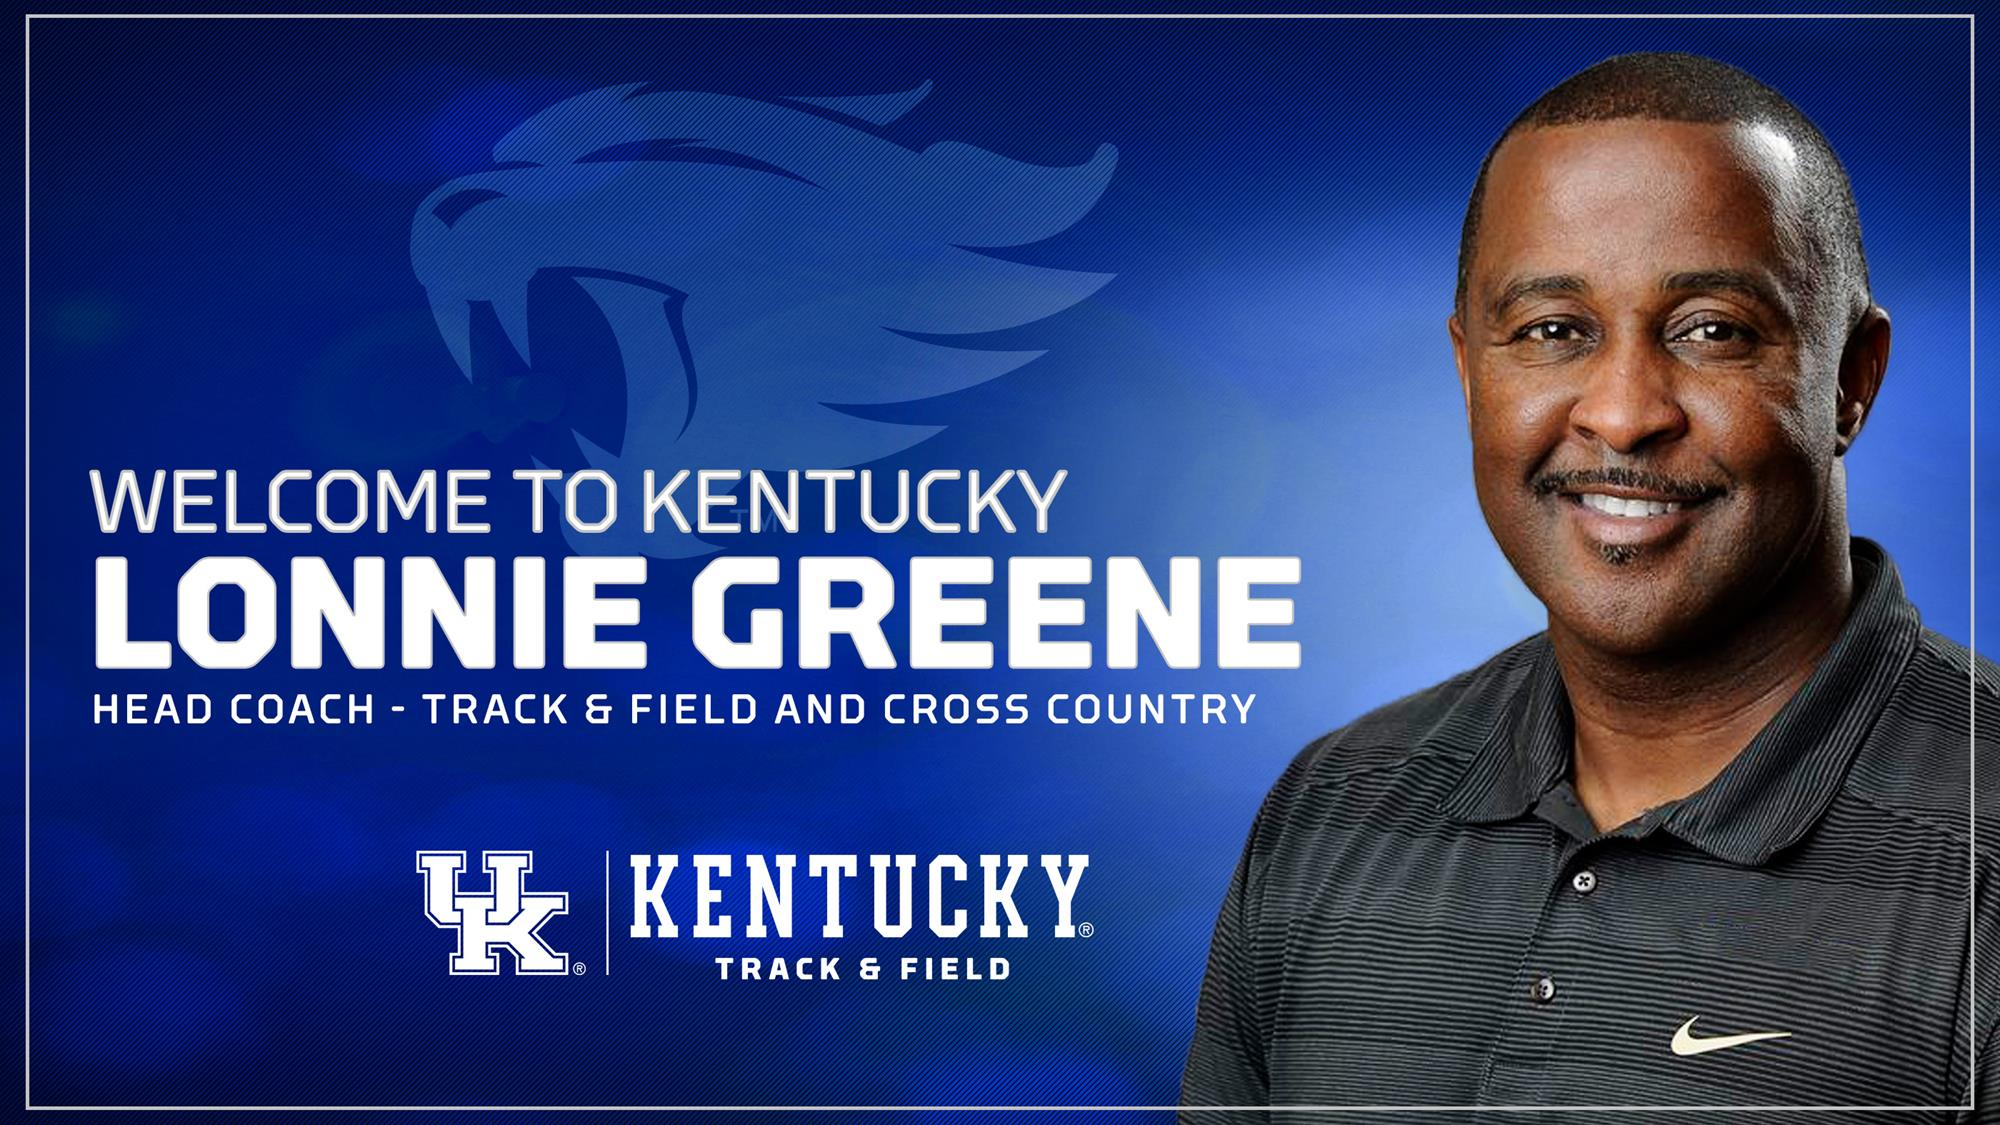 LIVE at 3:30: Lonnie Greene Introductory Press Conference